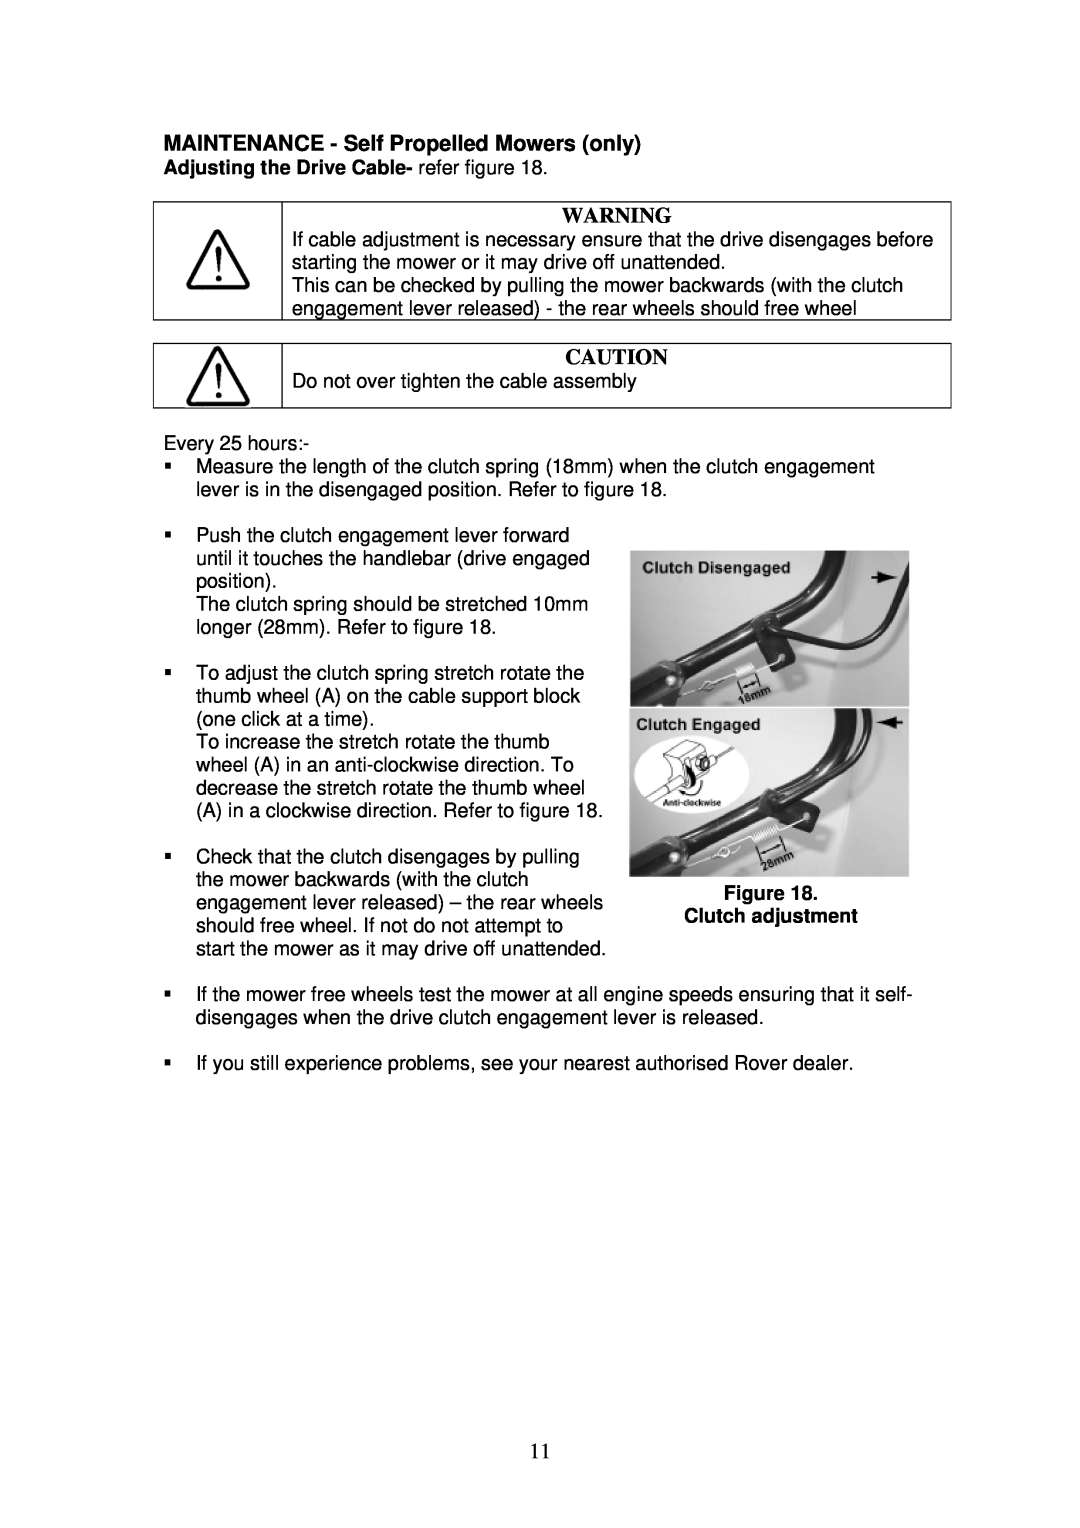 Rover 460 owner manual MAINTENANCE - Self Propelled Mowers only, Adjusting the Drive Cable- refer figure, Clutch adjustment 